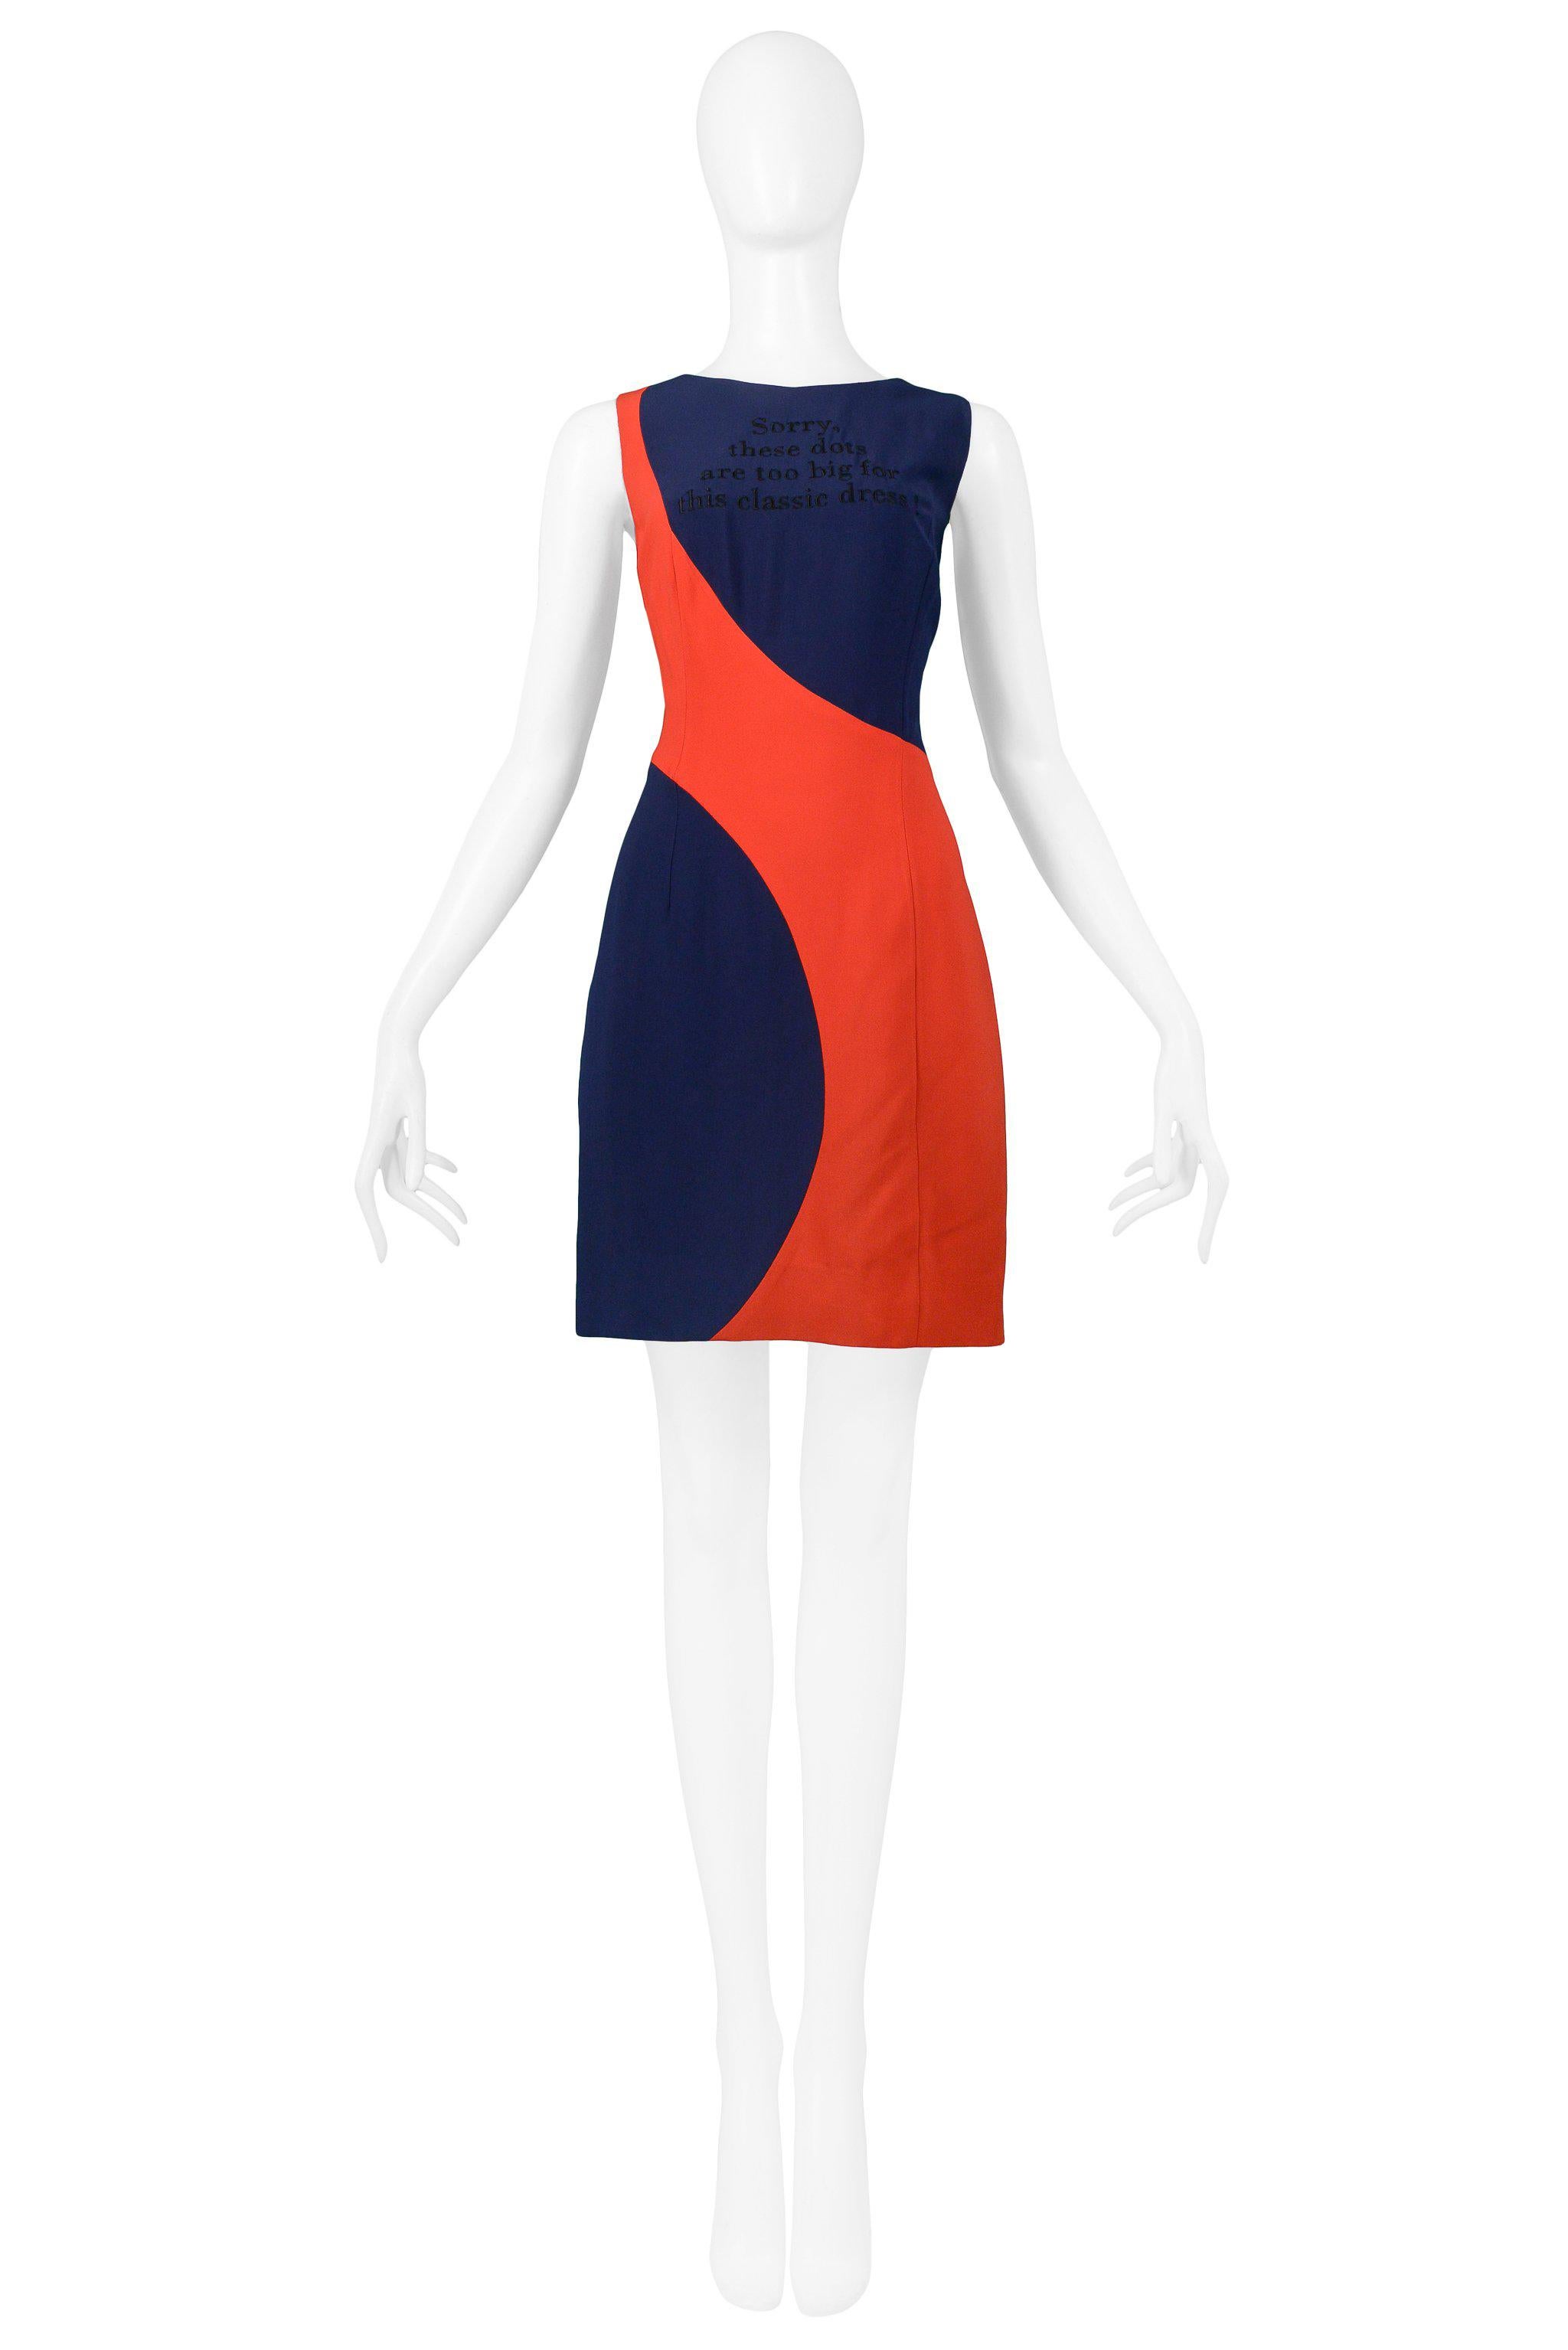 Resurrection Vintage is excited to offer a vintage navy and red Moschino Couture by Franco Moschino rayon blend shift mini dress: featuring navy and red insets, 